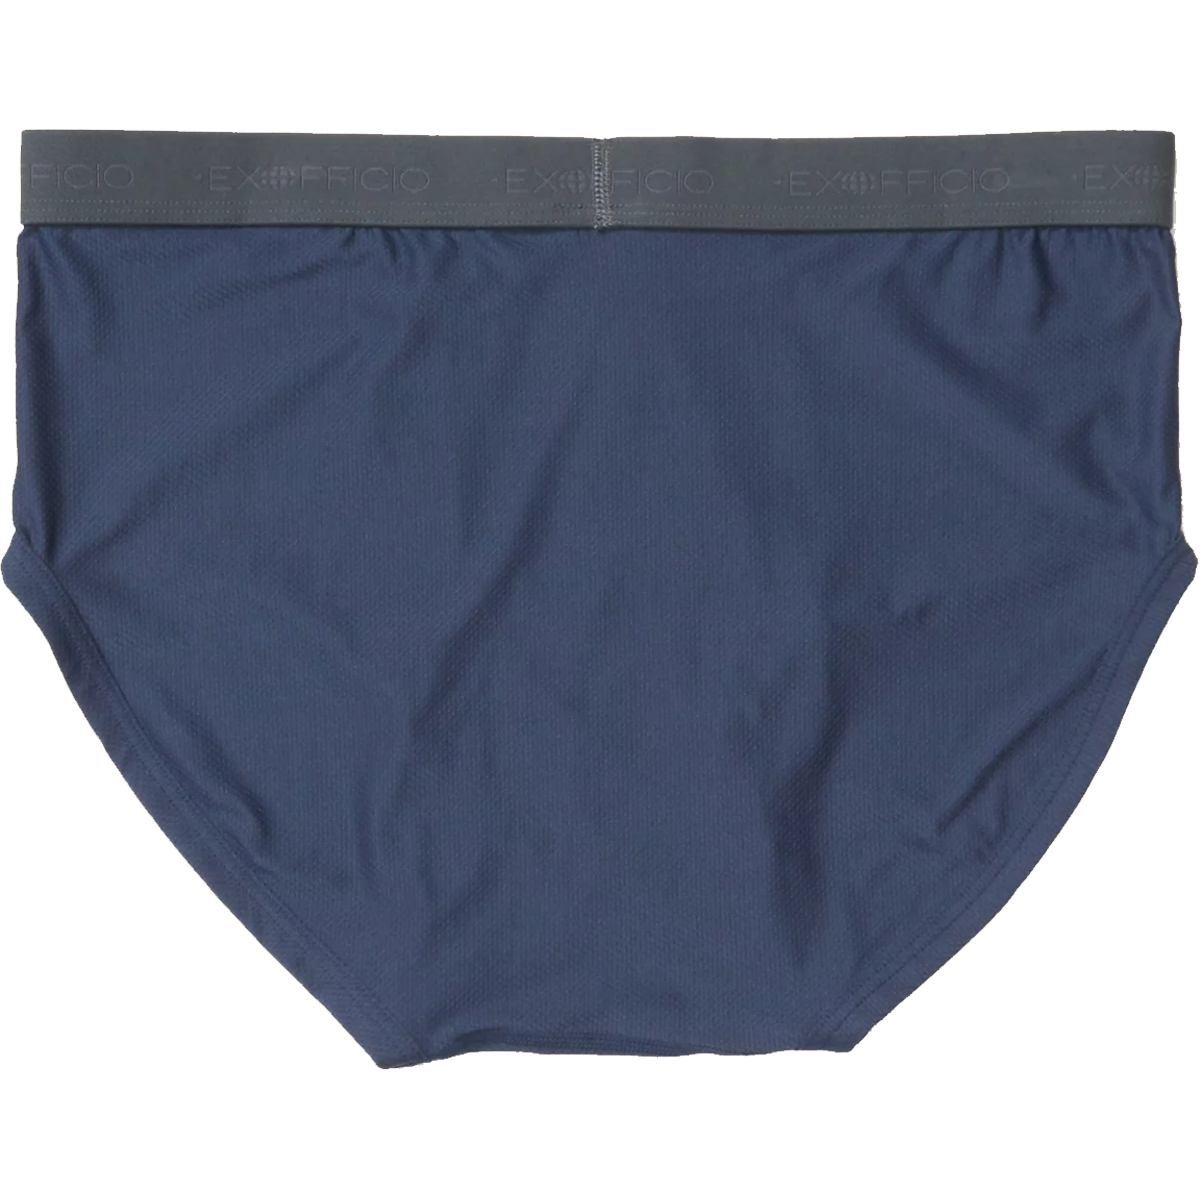 Men's Give-N-Go 2.0 Brief alternate view